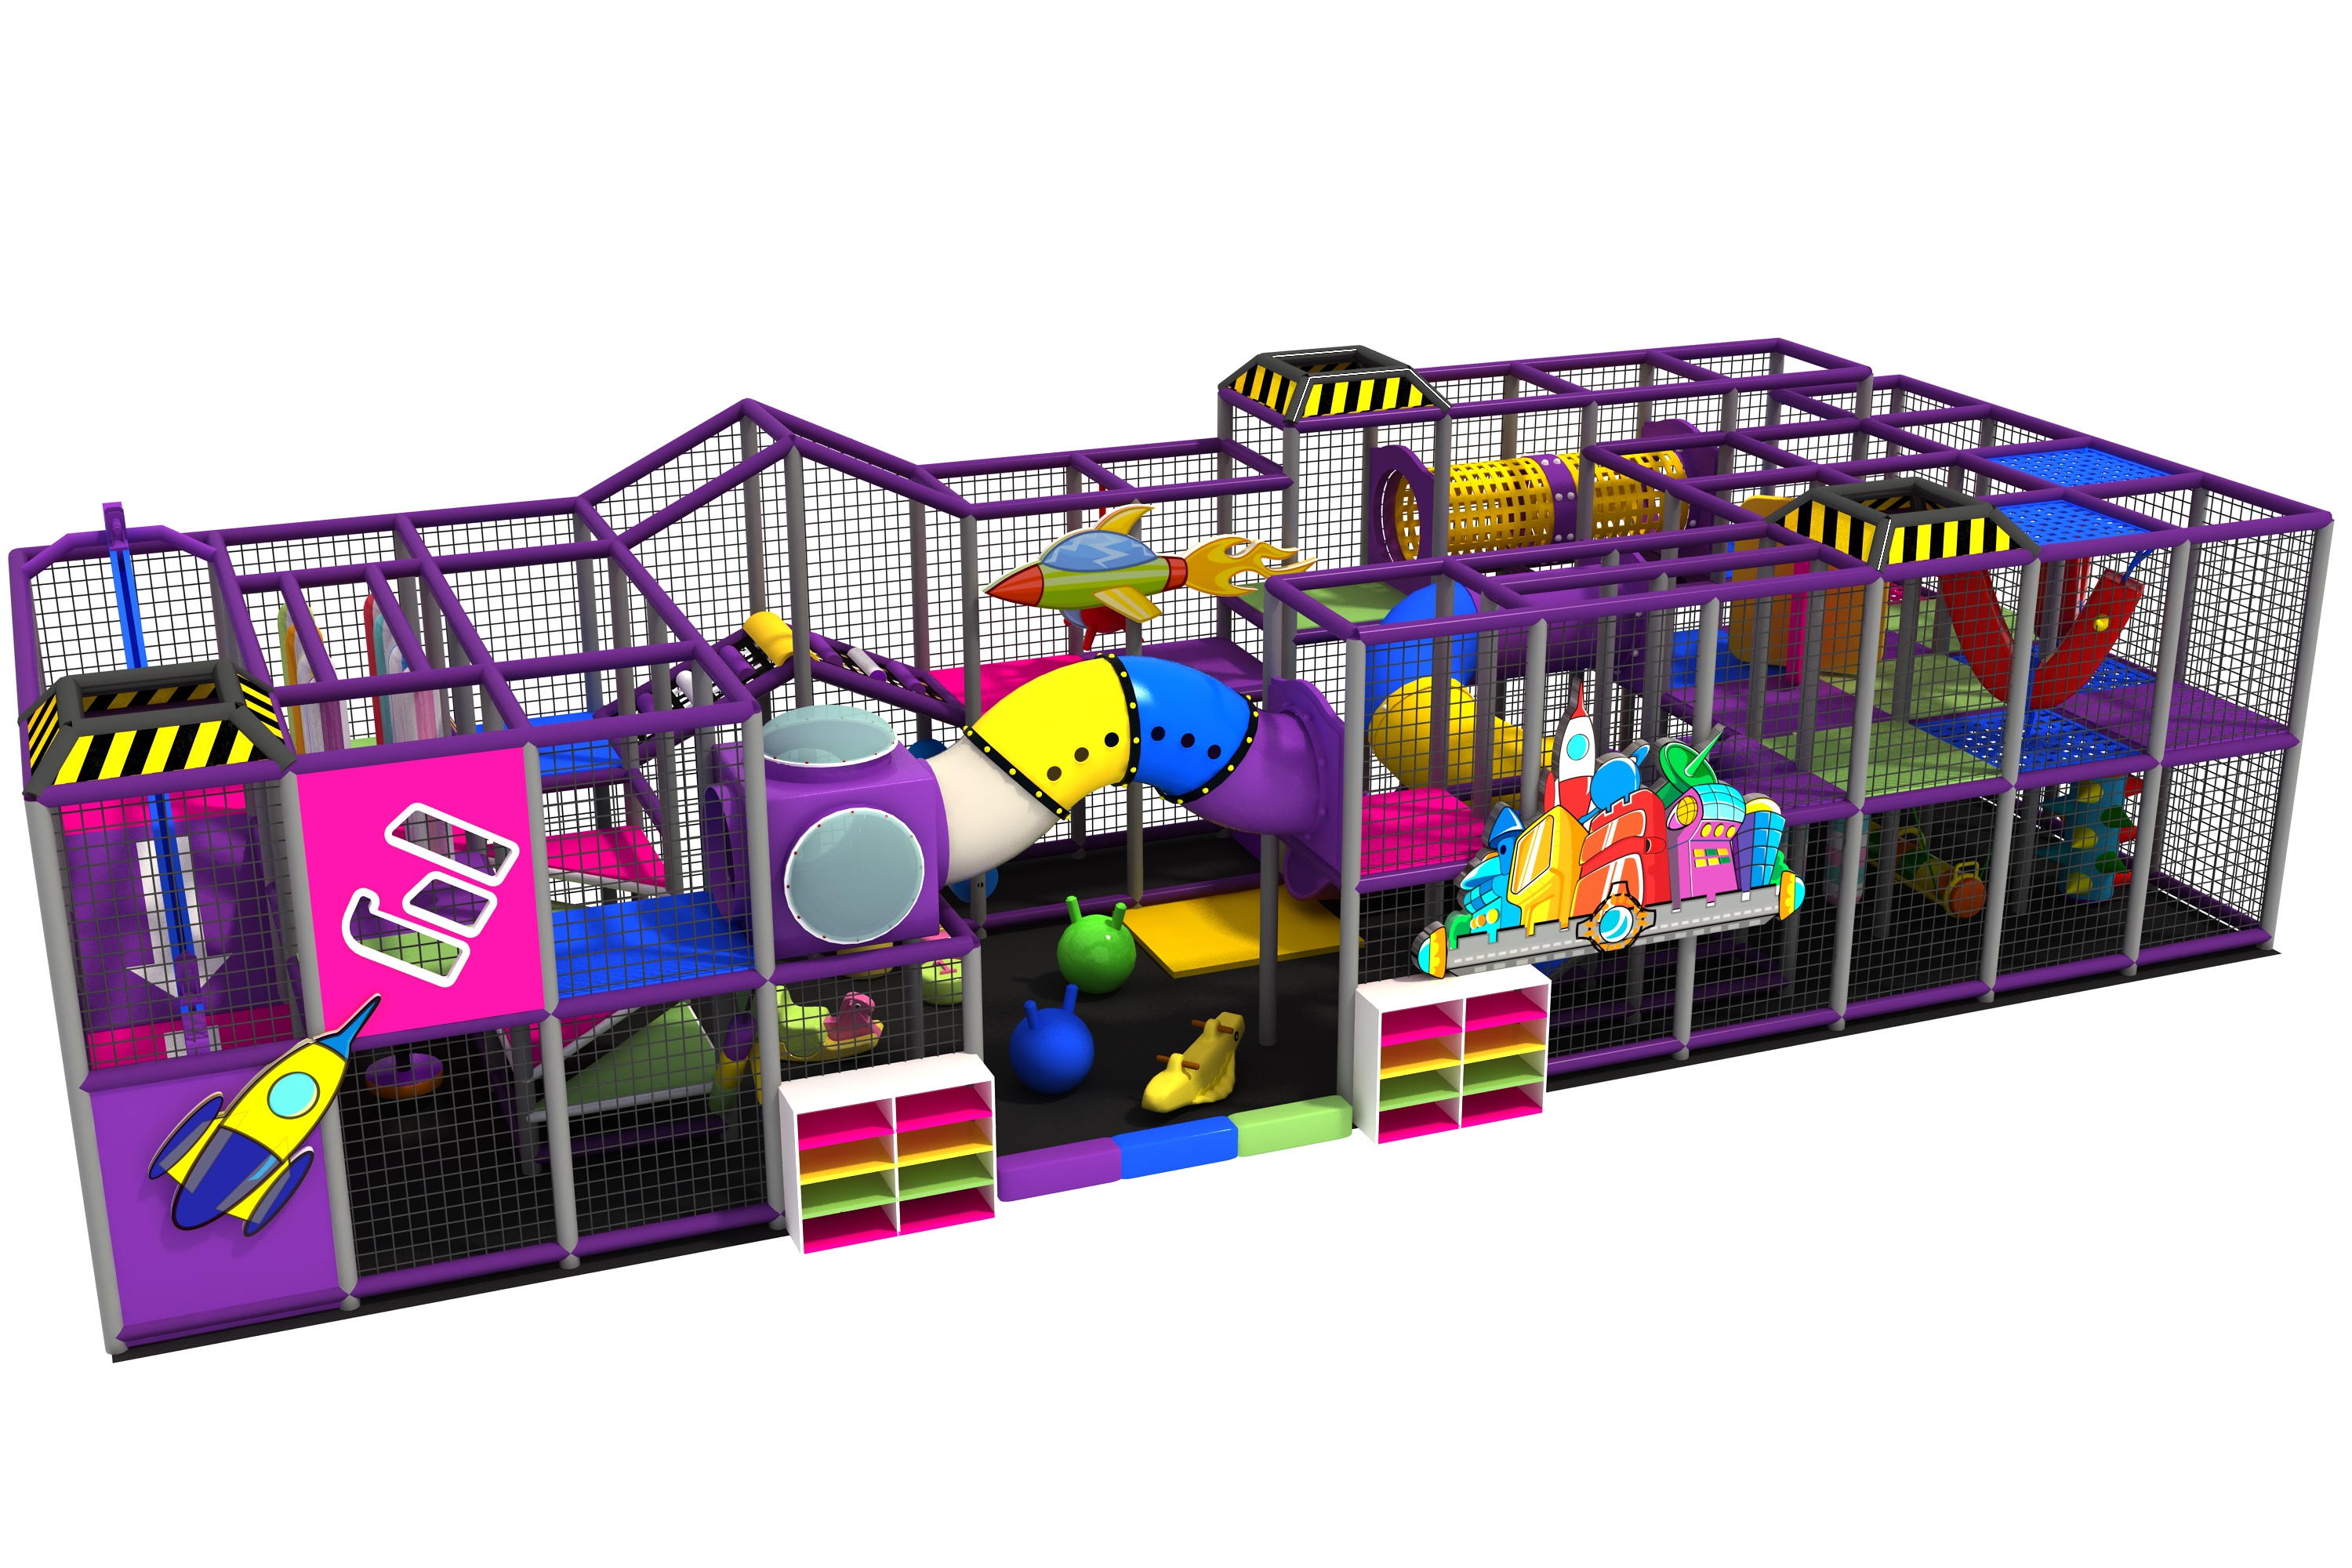 Anti-static Space Themed Indoor Playground with Trampoline